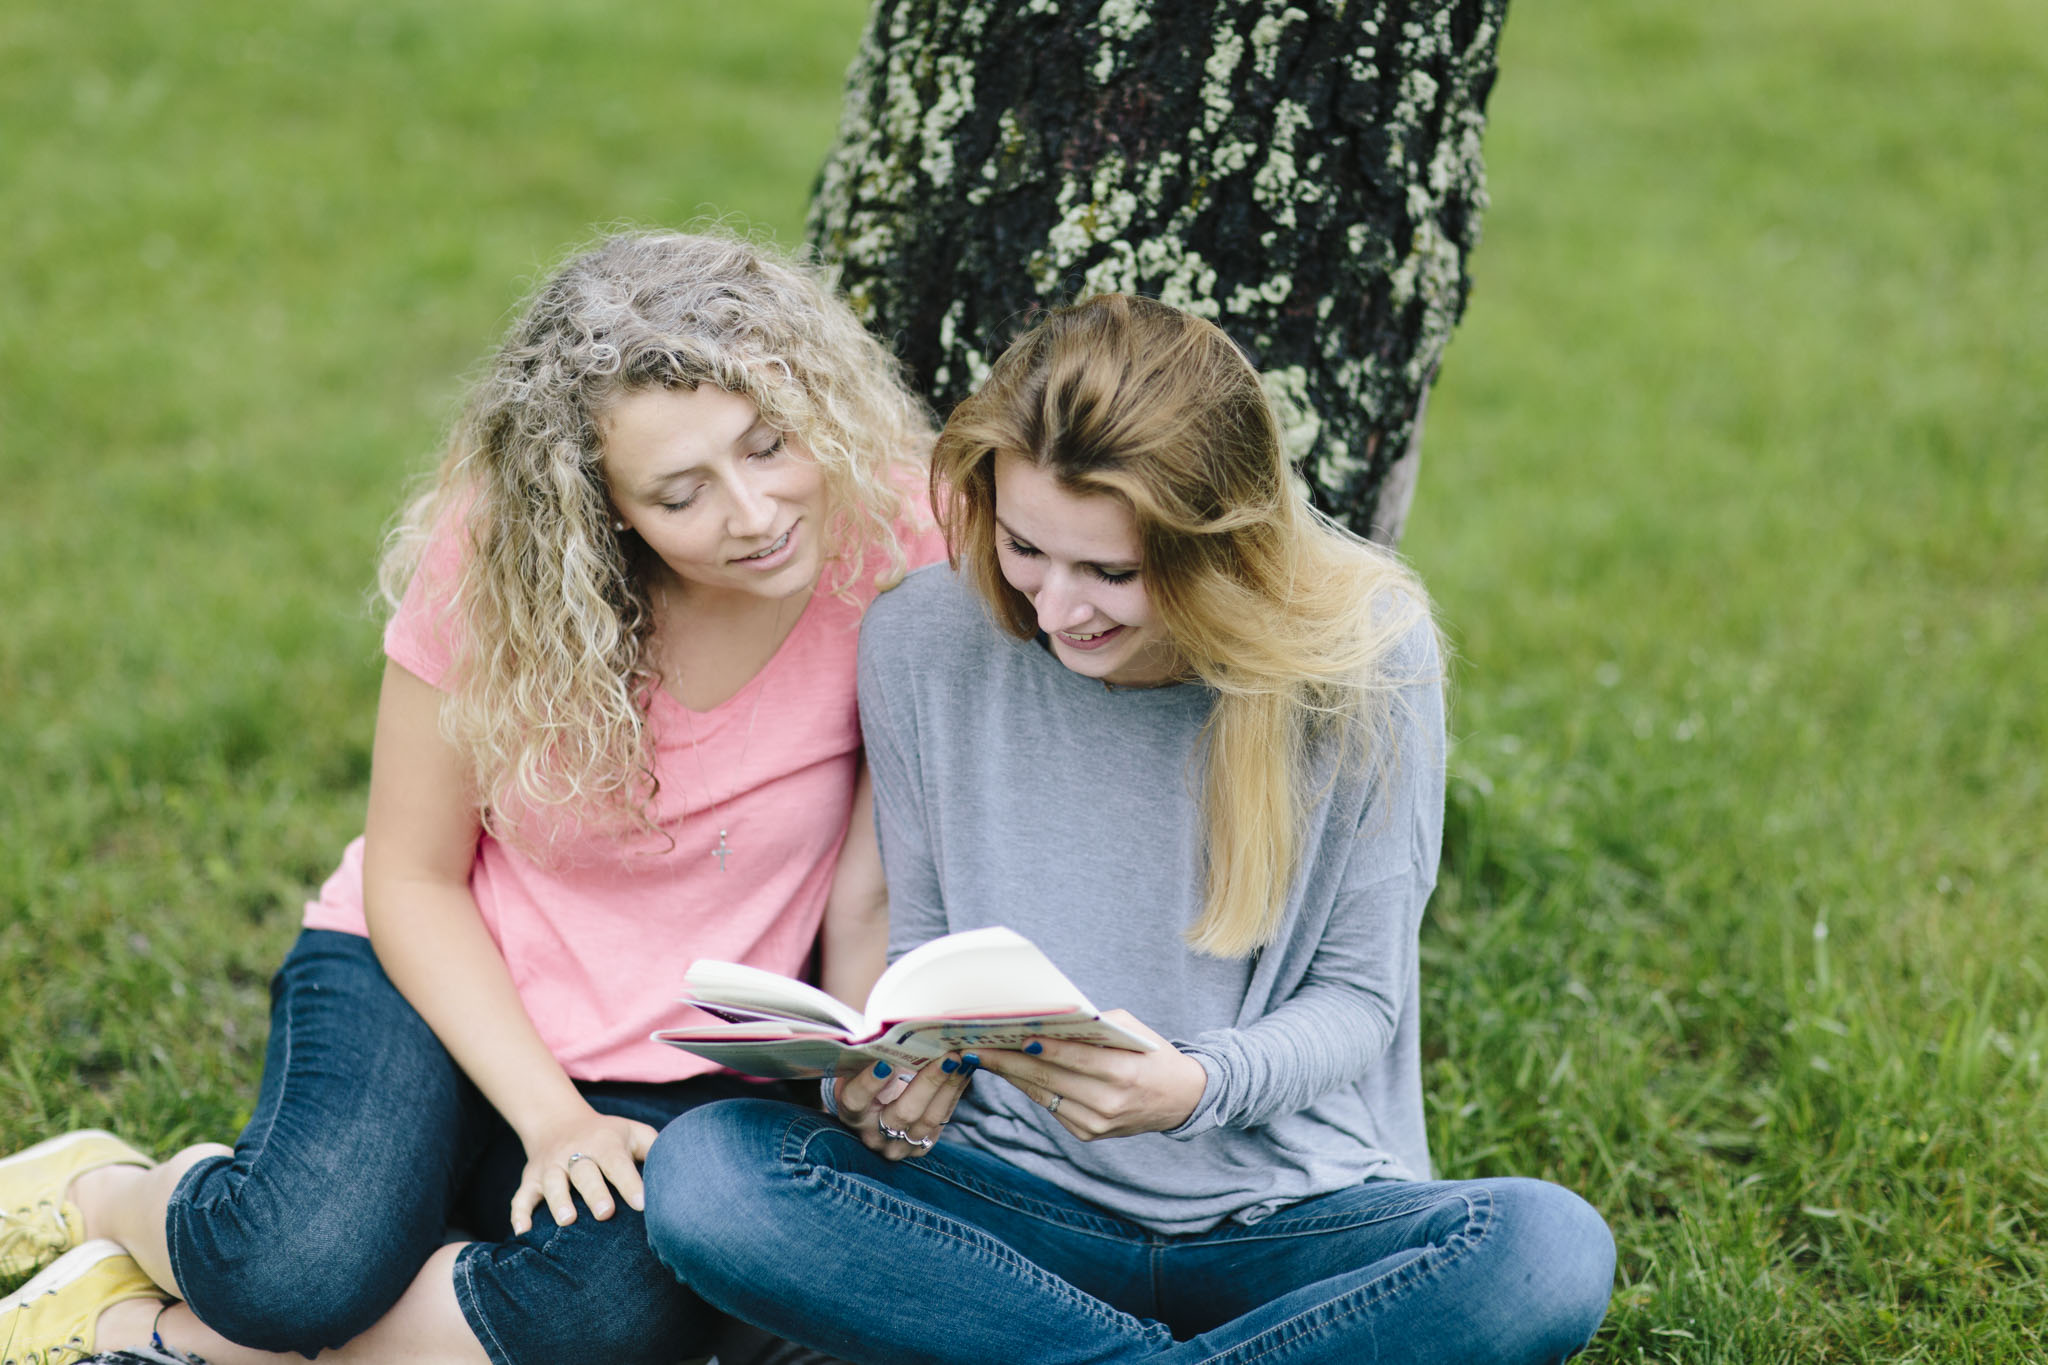 A mentor and teen sit outside and talk about a book they are reading